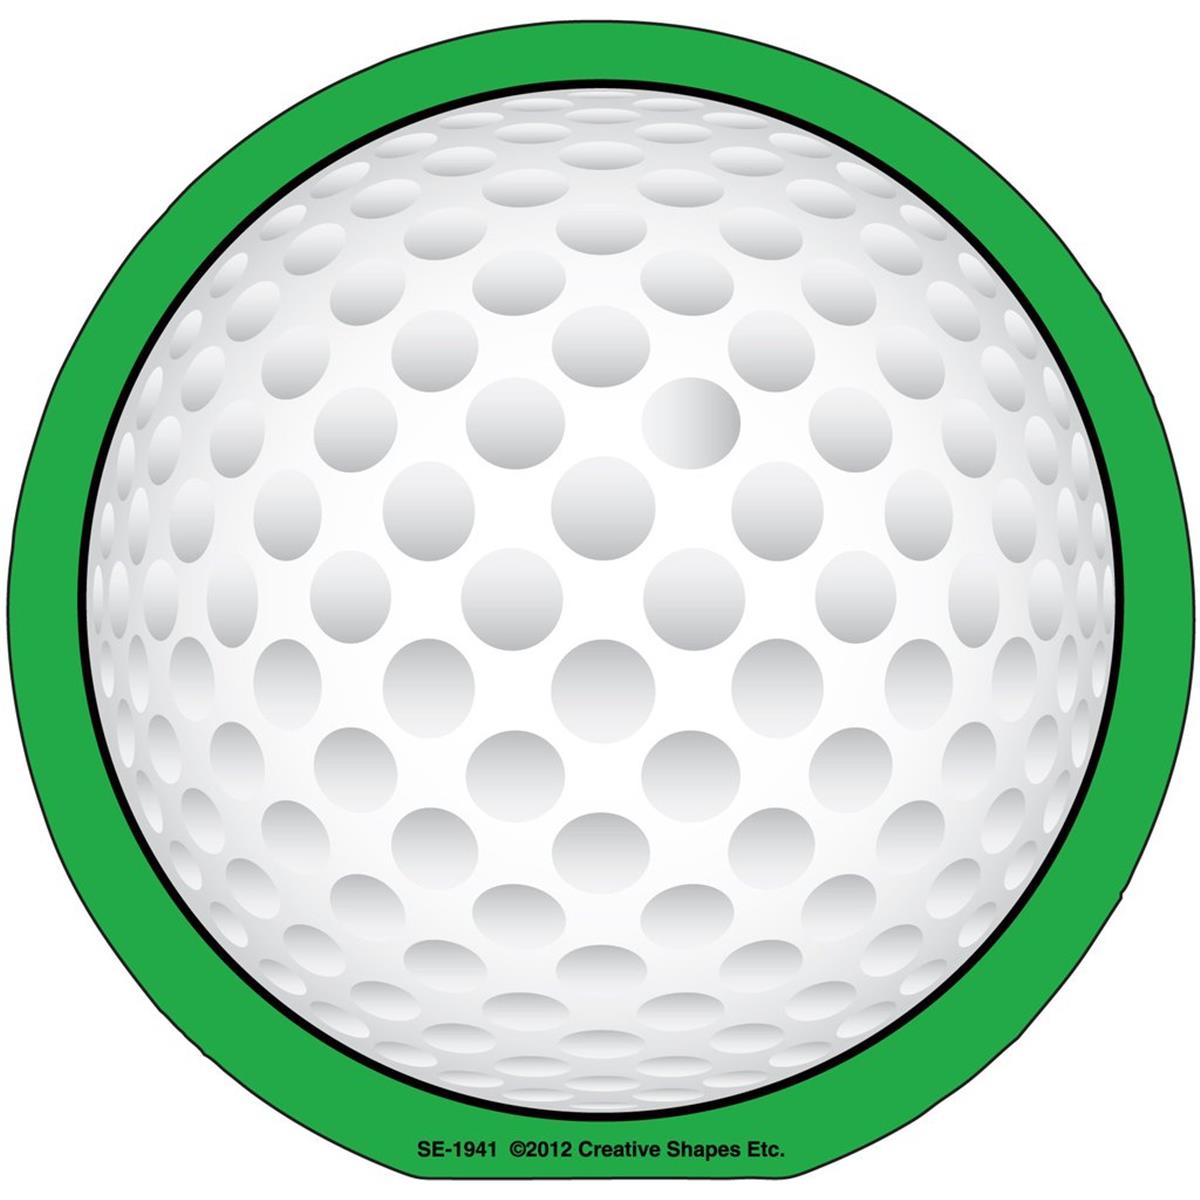 Se-1941 9 X 6 In. Large Notepad, Golf Ball - 50 Sheets Per Pack